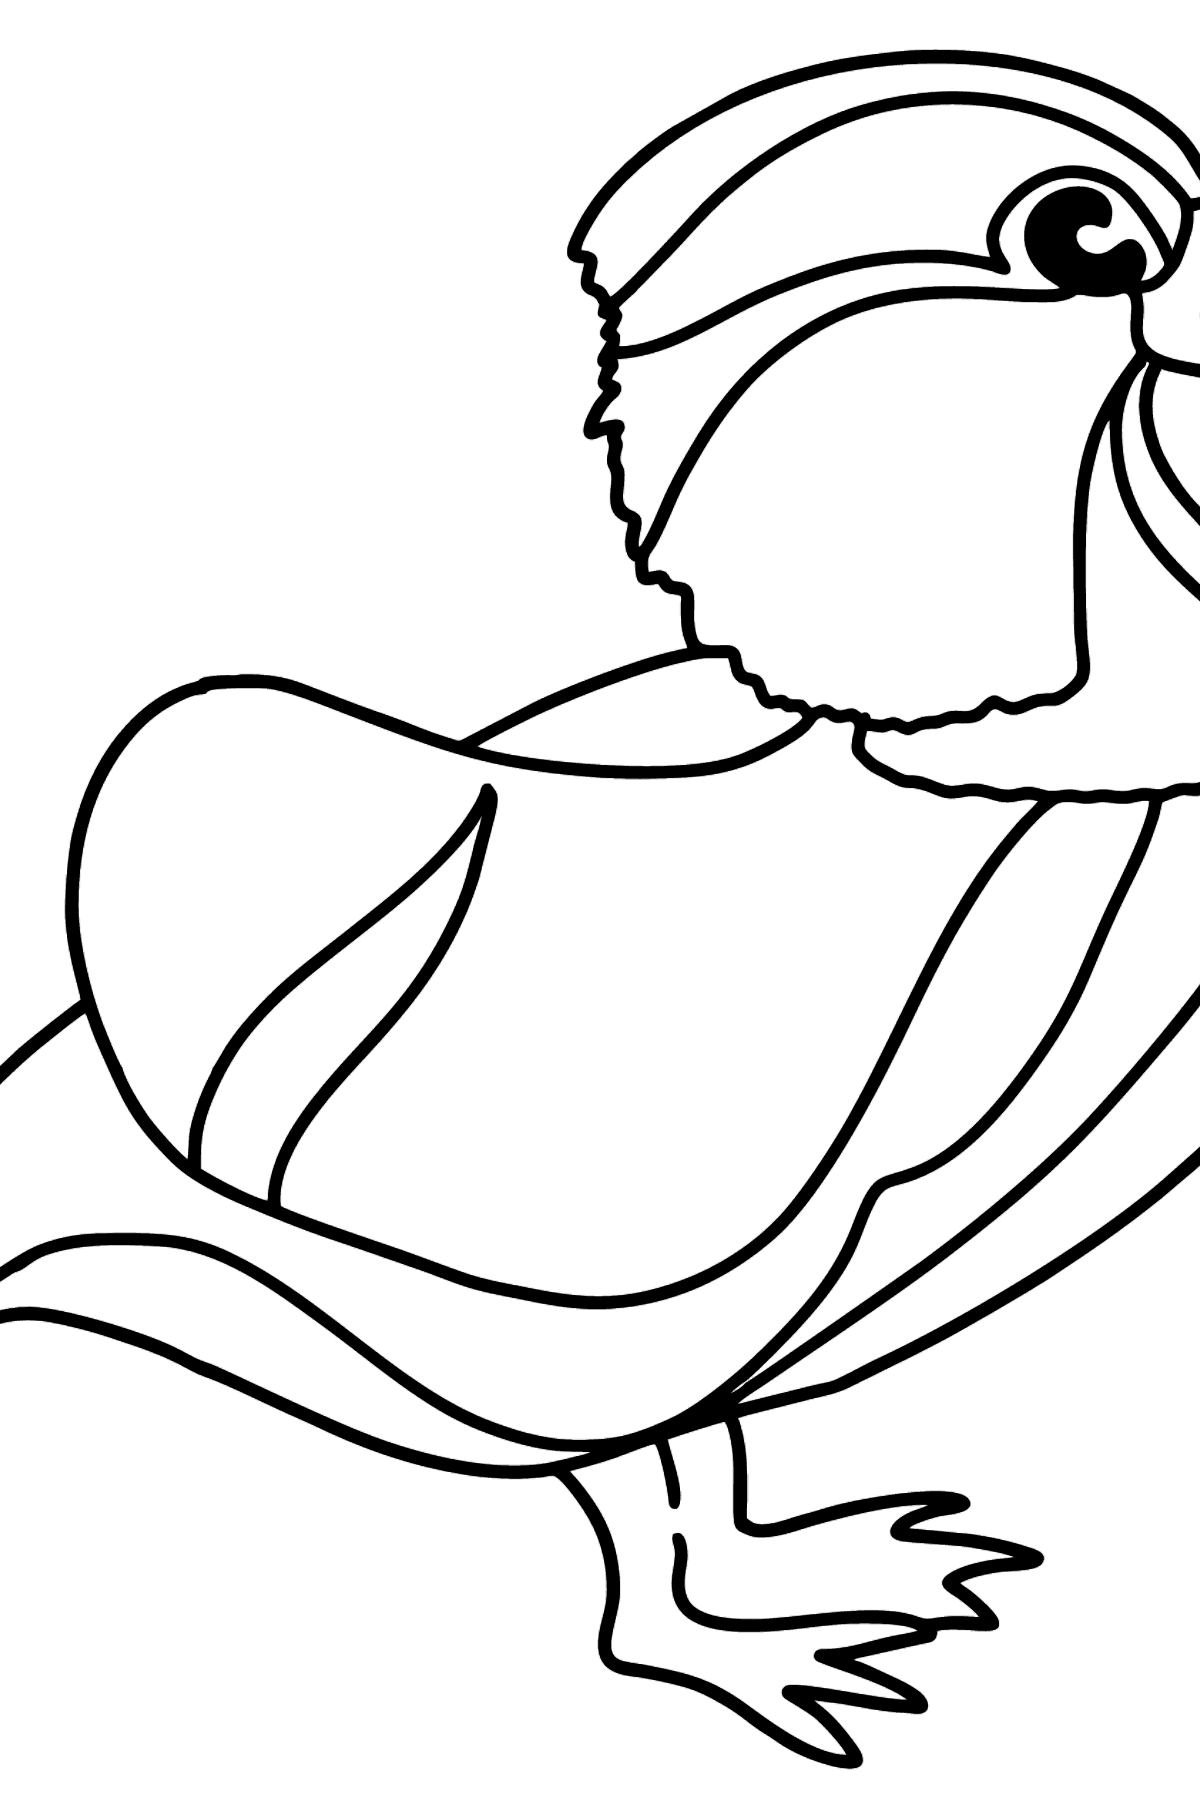 Mandarin Duck coloring page - Coloring Pages for Kids